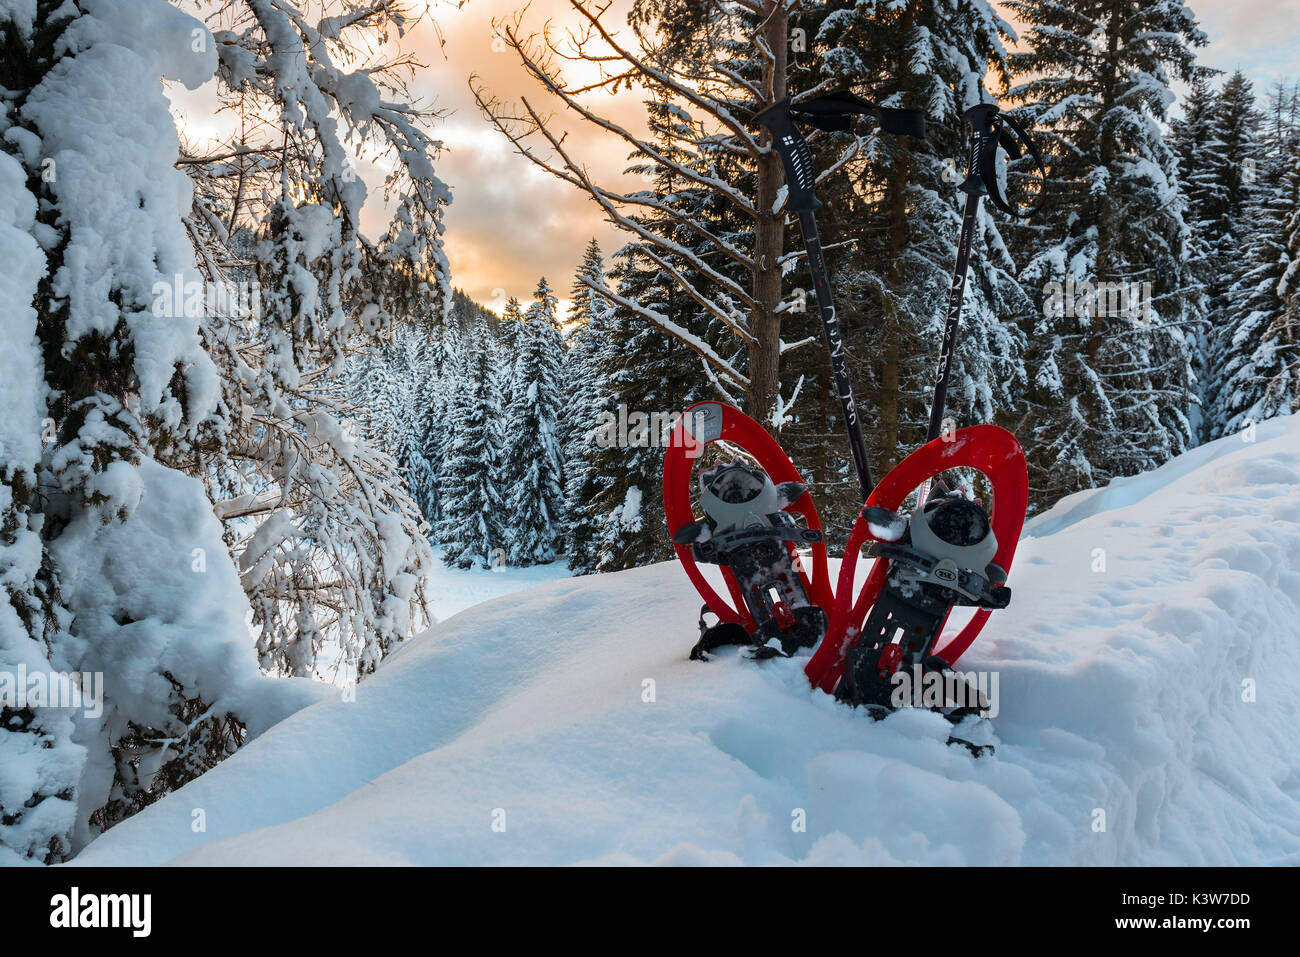 Europe, Italy, Trentino Alto Adige, Non valley. snowshoes in the snow and in the background the many snow-covered trees. Stock Photo